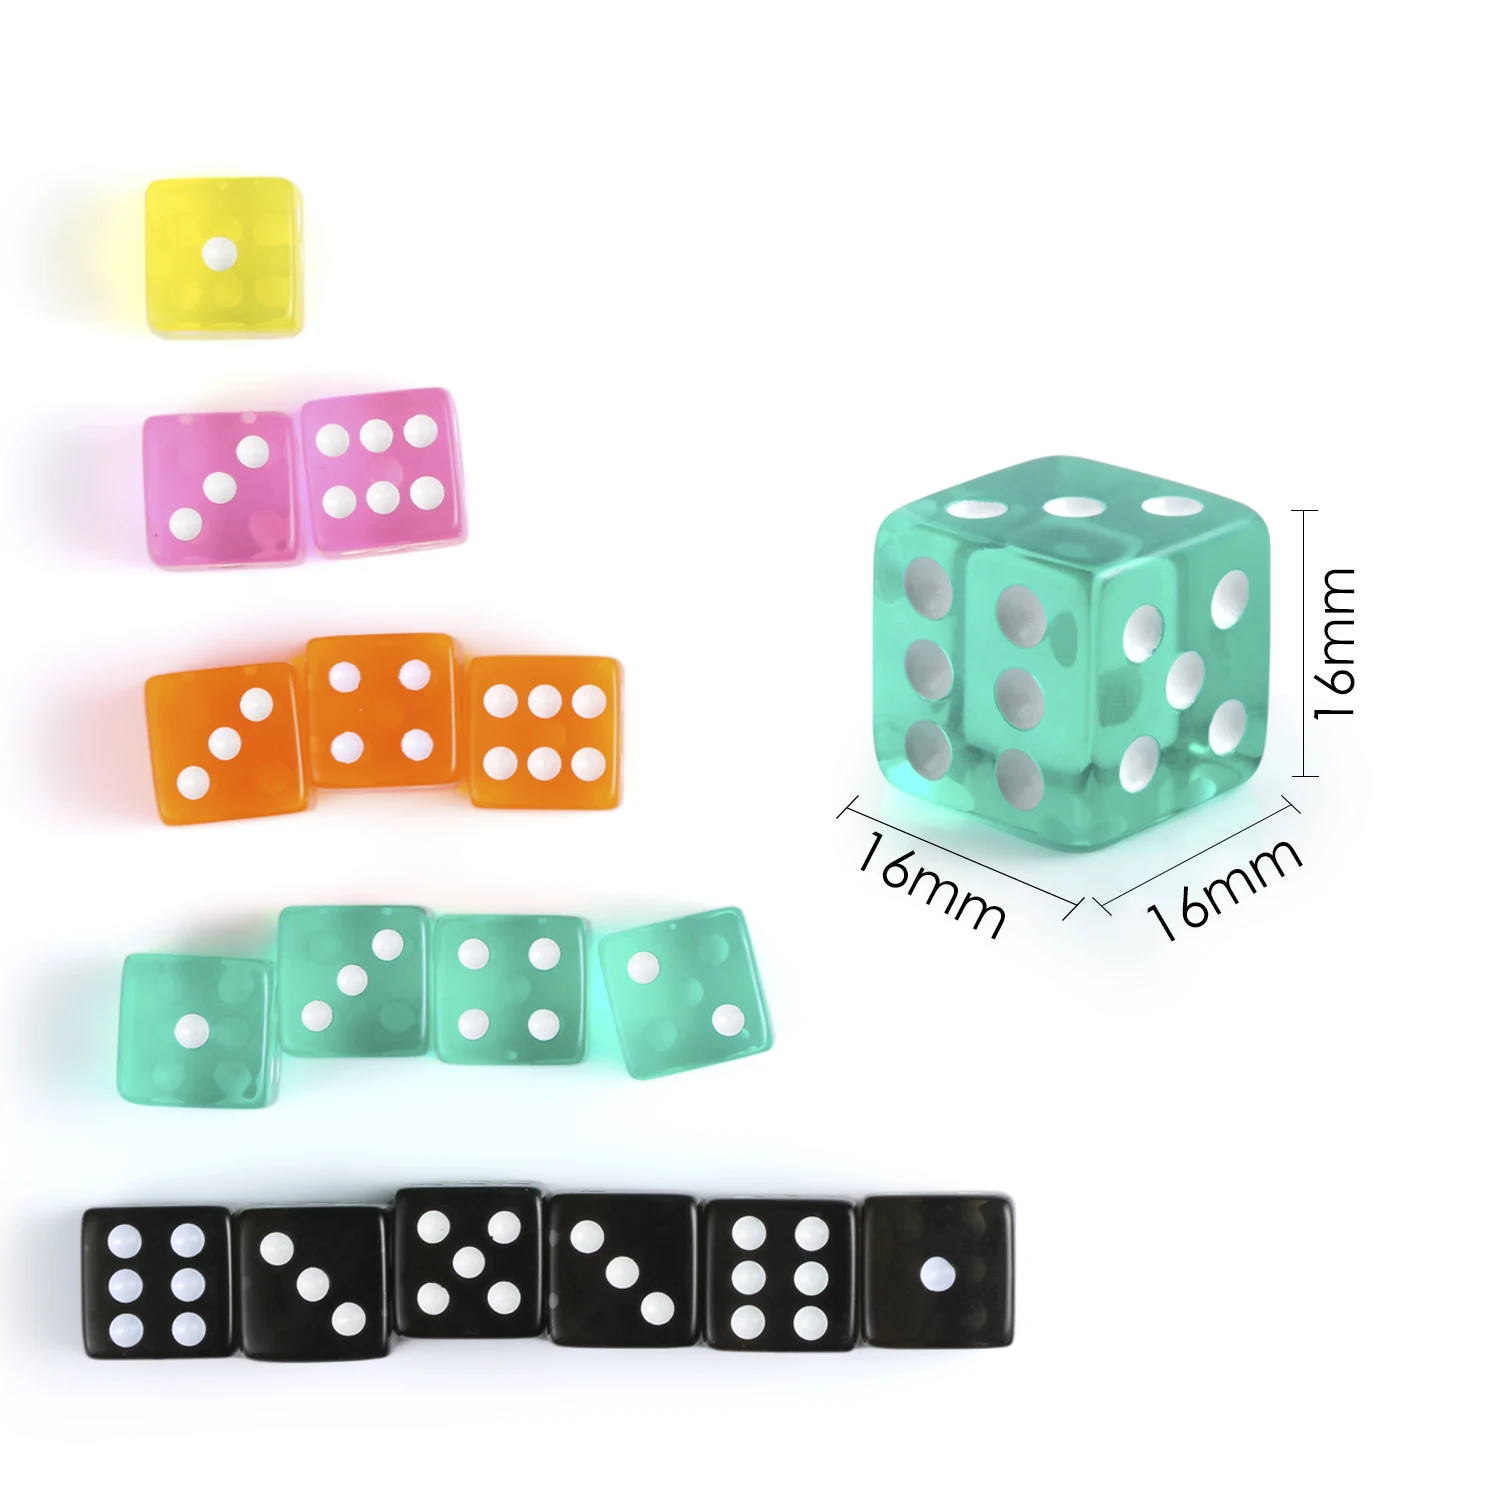 NEW Set of 6 Fish Sea Green D6 Game Dice Six Sided Animal 16mm Koplow 